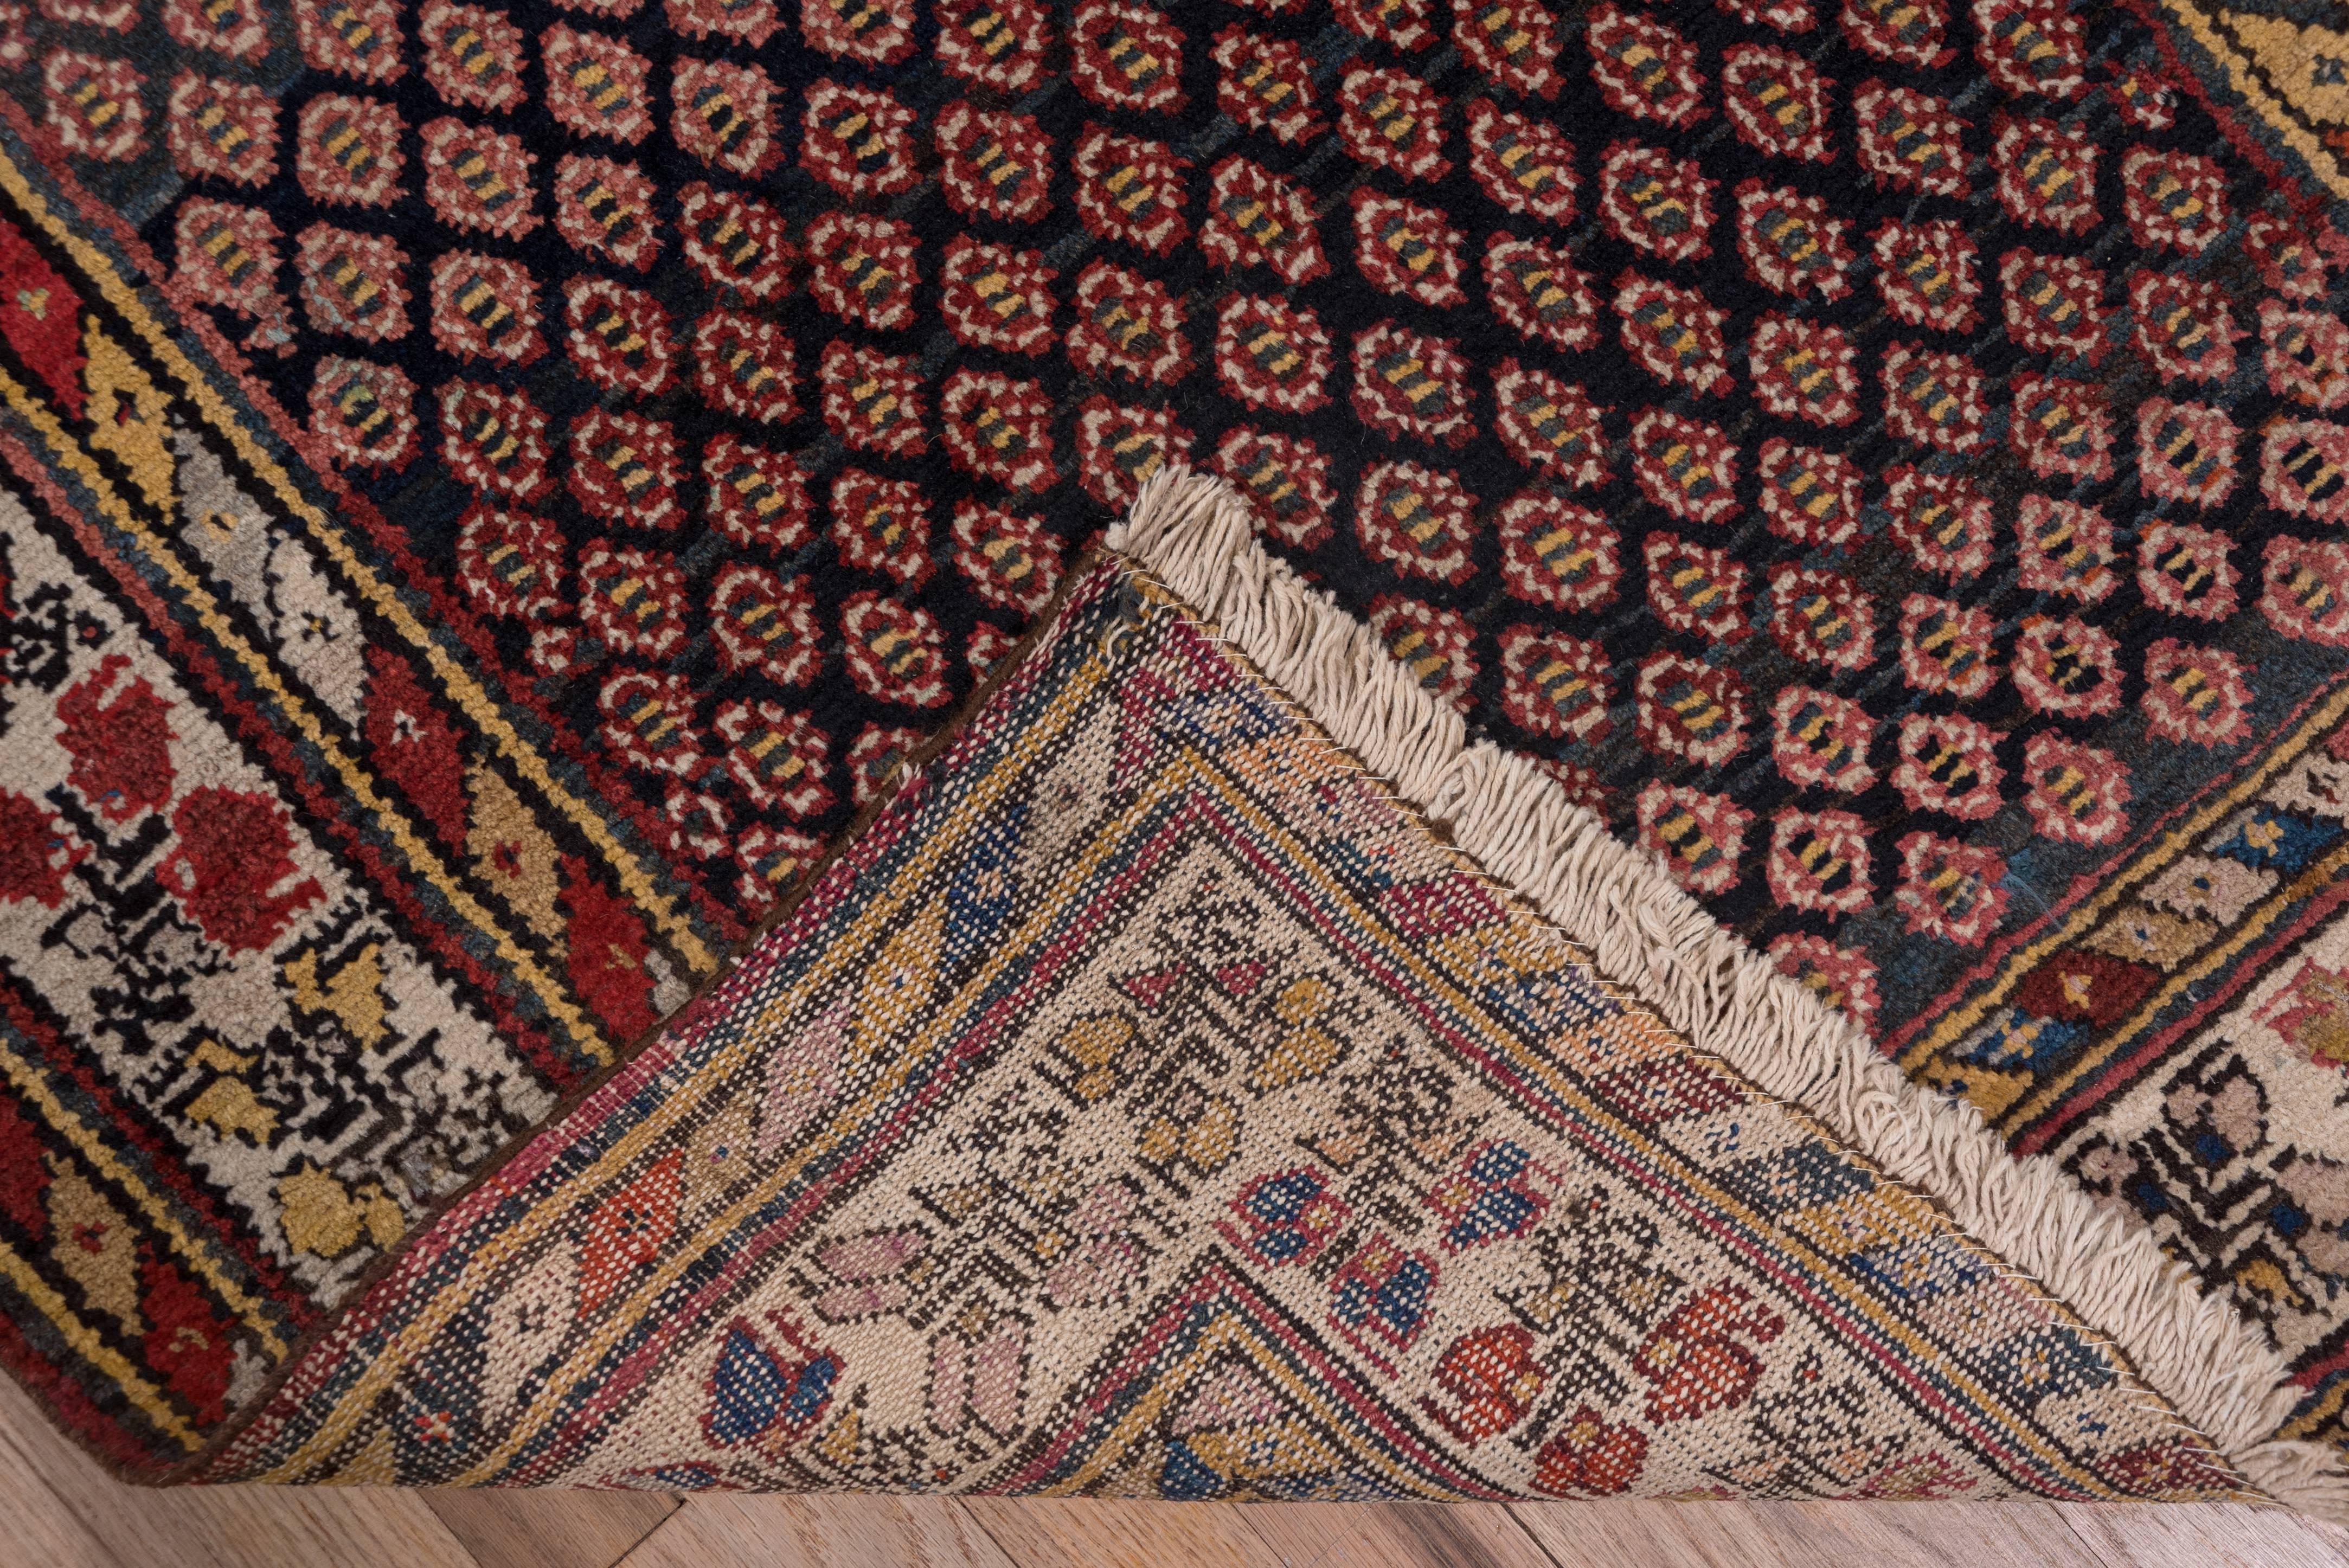 This Western Persian village runner has an abrashed dark brown field with an all-over pattern of small multi colored semi-octagons. The ivory main border displays colorful triple flower motifs. The minor borders are both in a broad barber full style